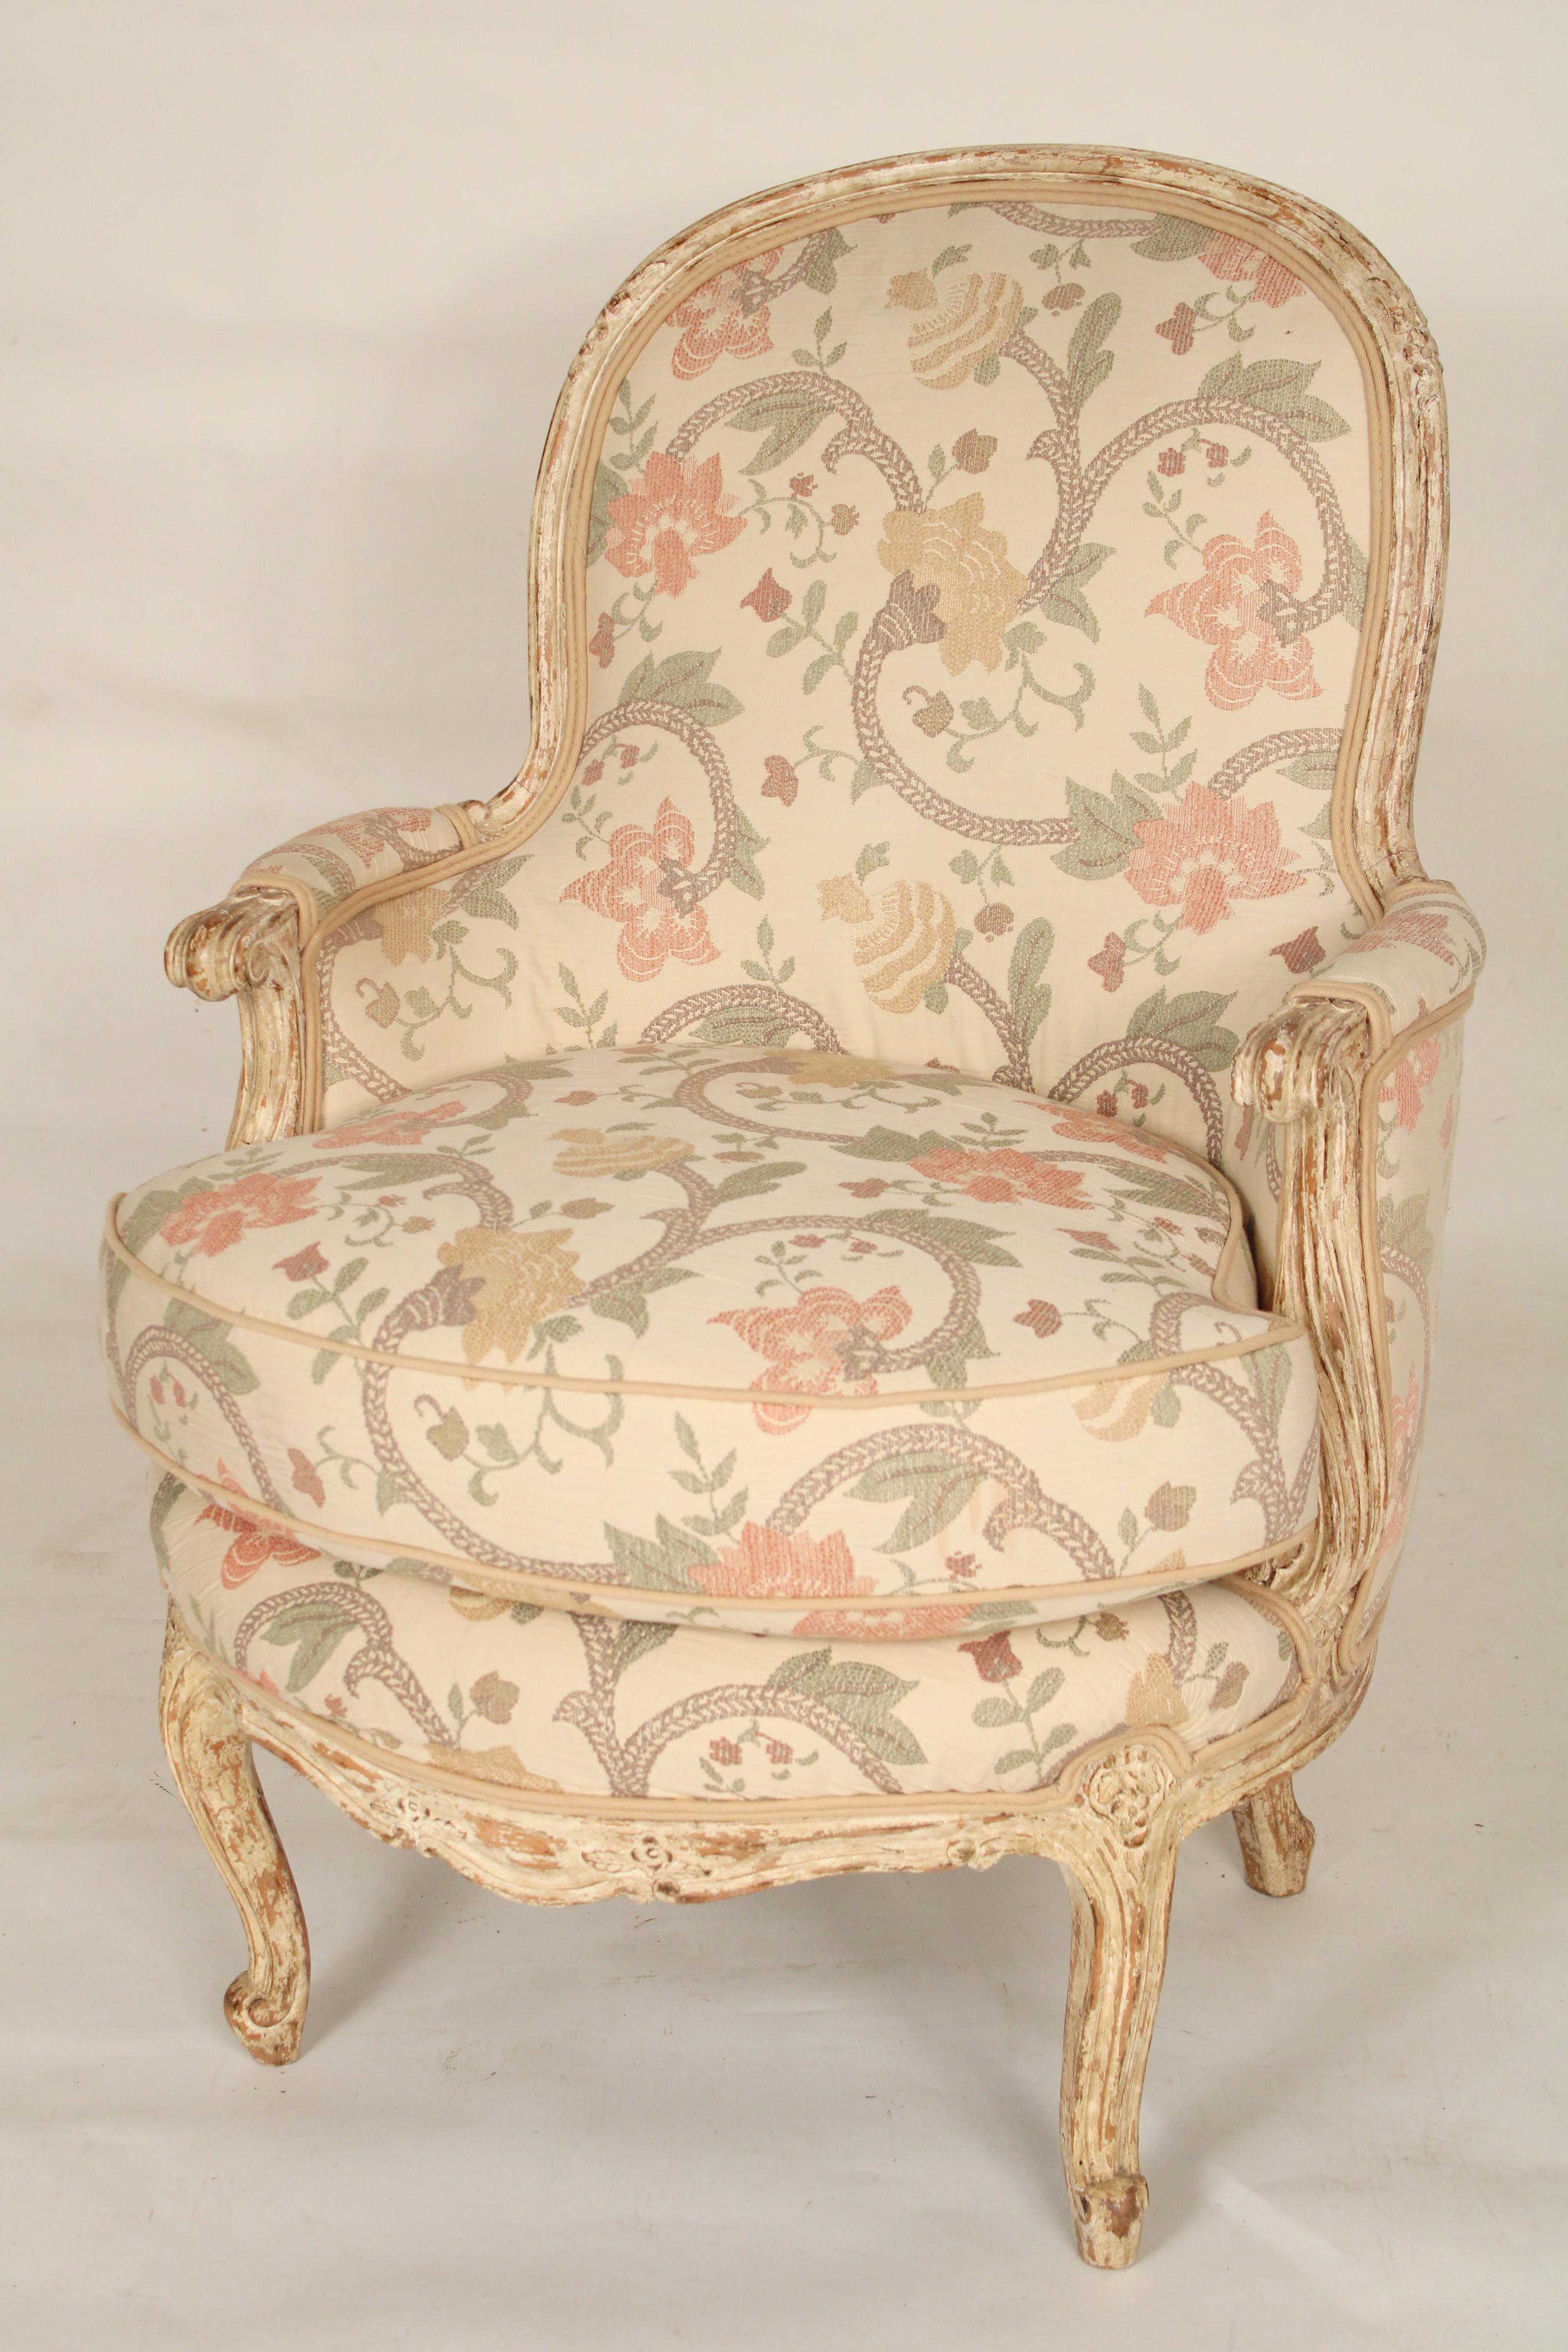 Pair of painted Louis XV style bergeres, circa 1930-1950.